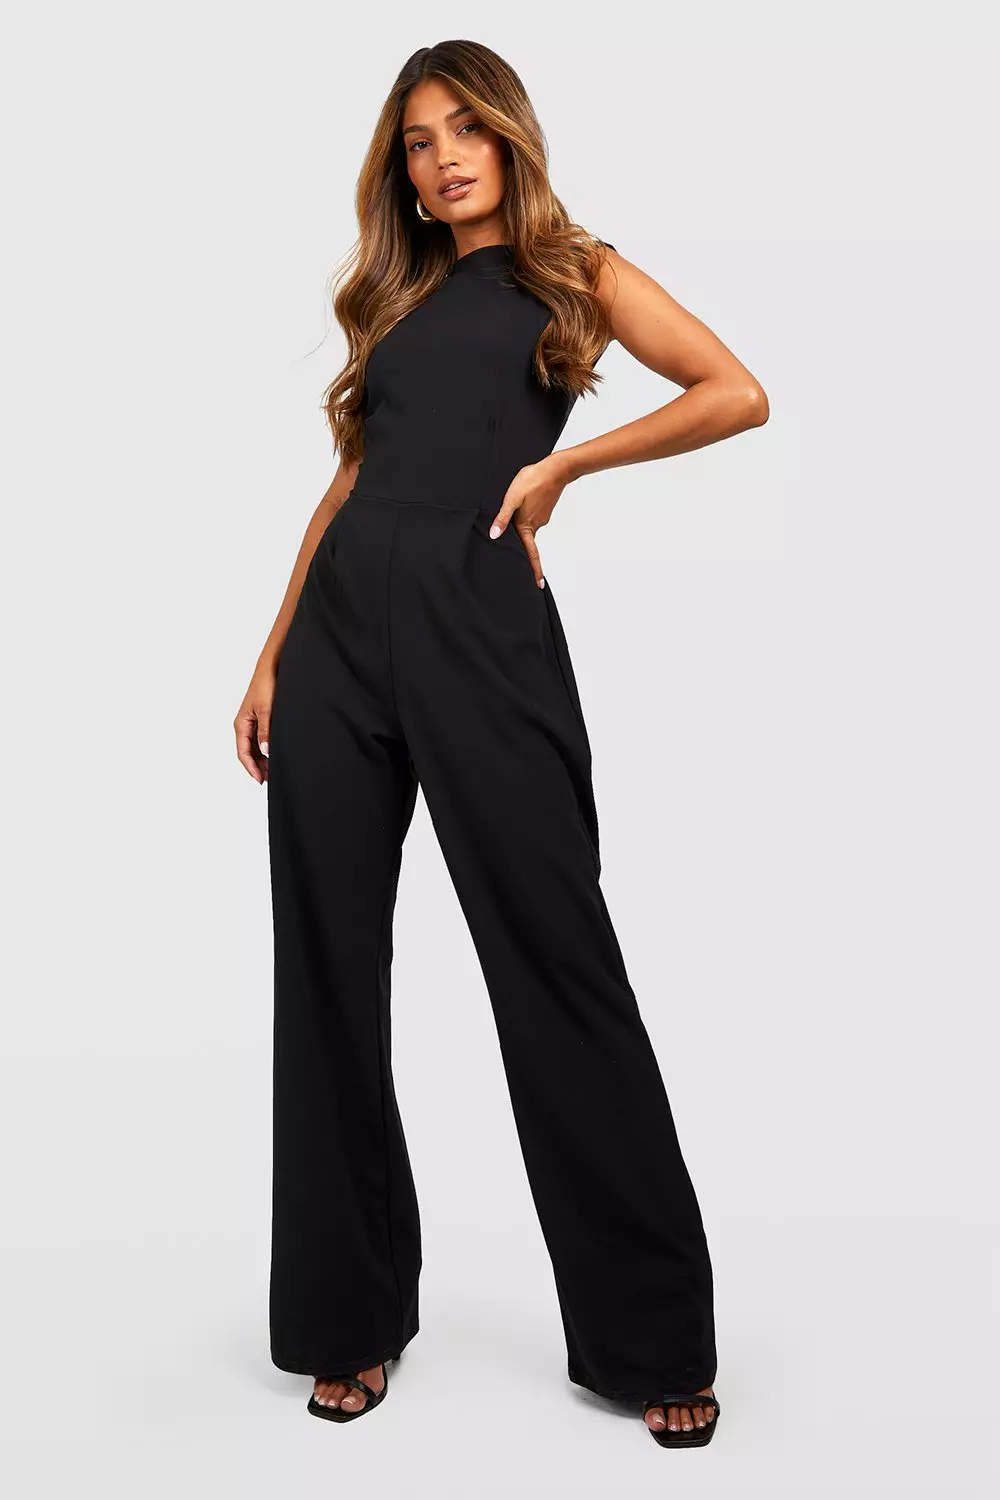 Tailored High Neck Cinched Waist Wide Leg Jumpsuit